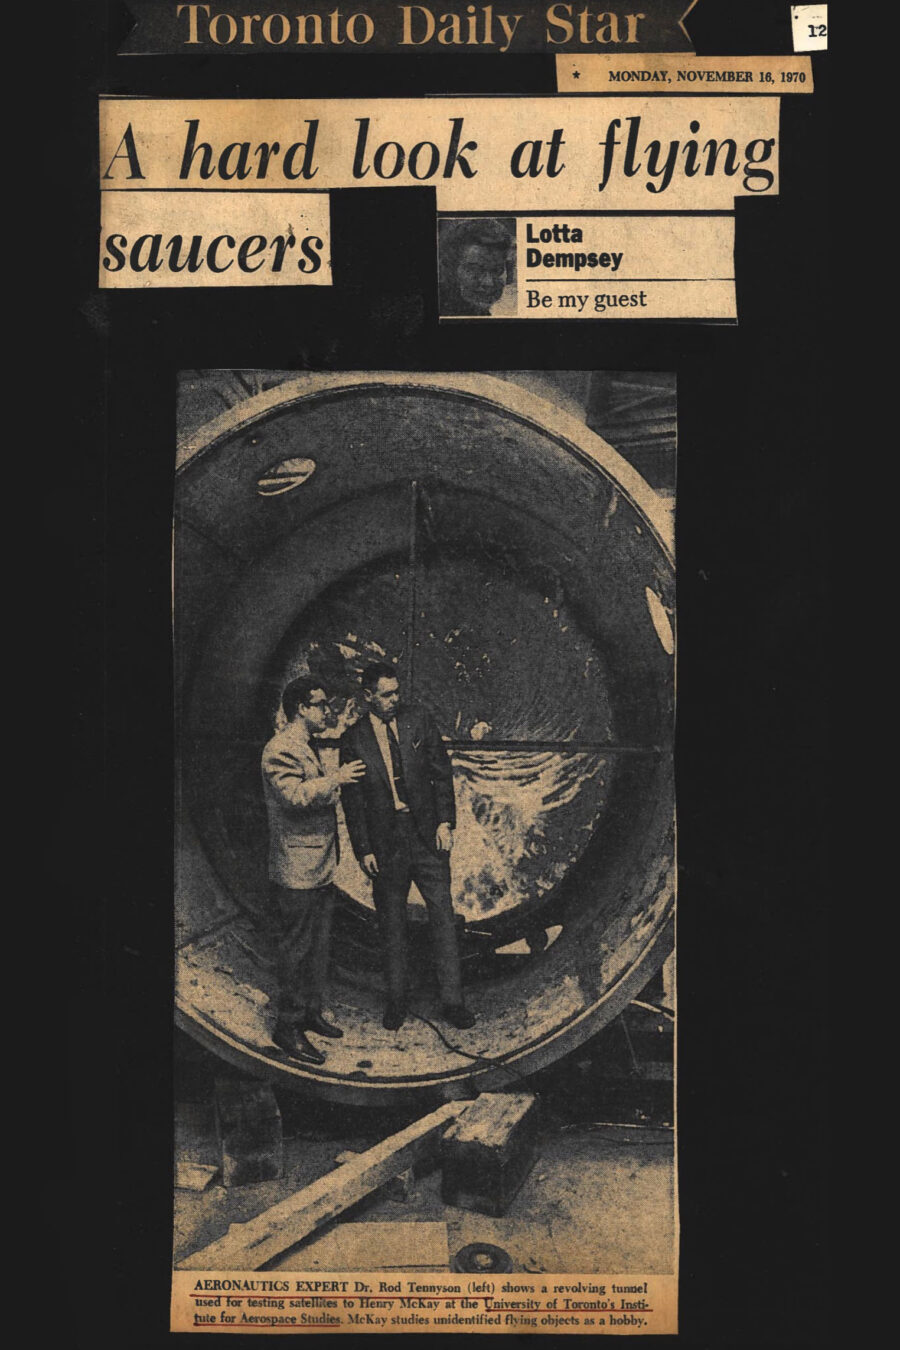 Newspaper clipping from Toronto Daily Star, November 16, 1970

Headline: A hard look at flying saucers

Photo 1 on page one of clipping: Two men (Doctor Rod Tennyson and Henry McKay) stand in the cylindrical drum of a revolving tunnel used for testing satellites 

Caption: Aeronautics expert Doctor Rod Tennyson (left) shows a revolving tunnel used for testing satellites to Henry McKay at the University of Toronto’s Institute for Aerospace Studies. McKay studies unidentified flying objects as a hobby.